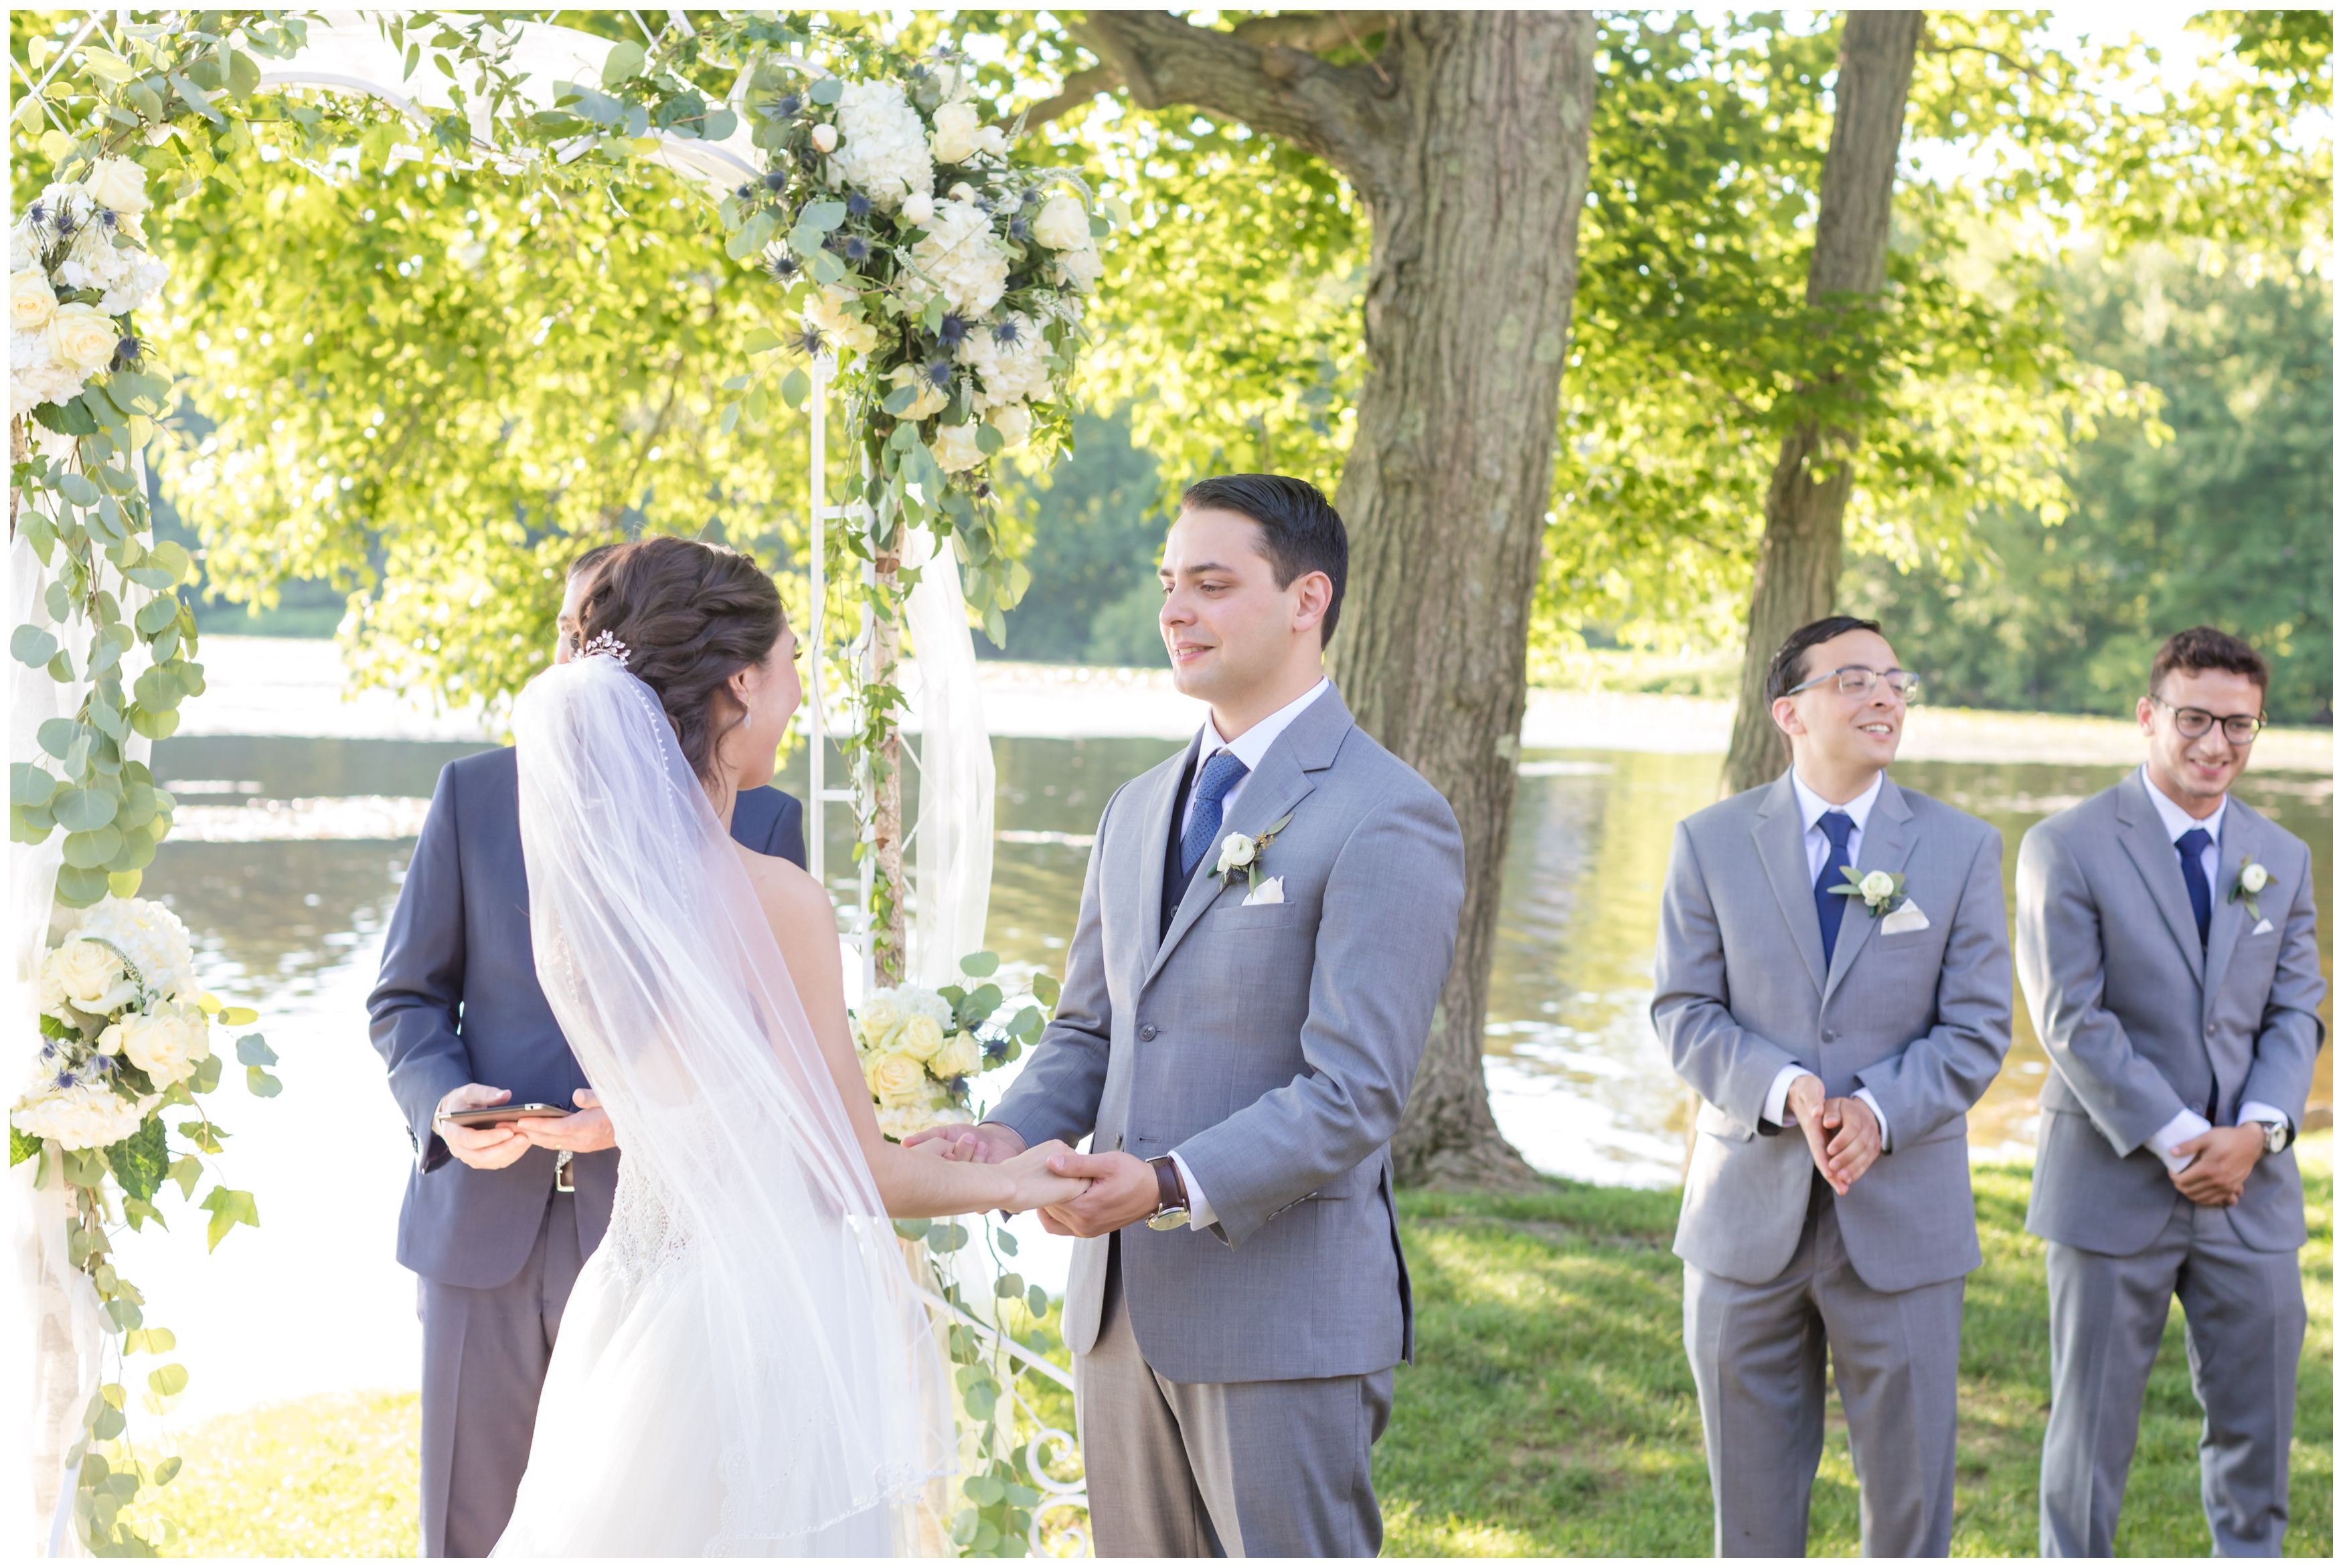 Groom and bride saying vows at outdoor lakeside ceremony